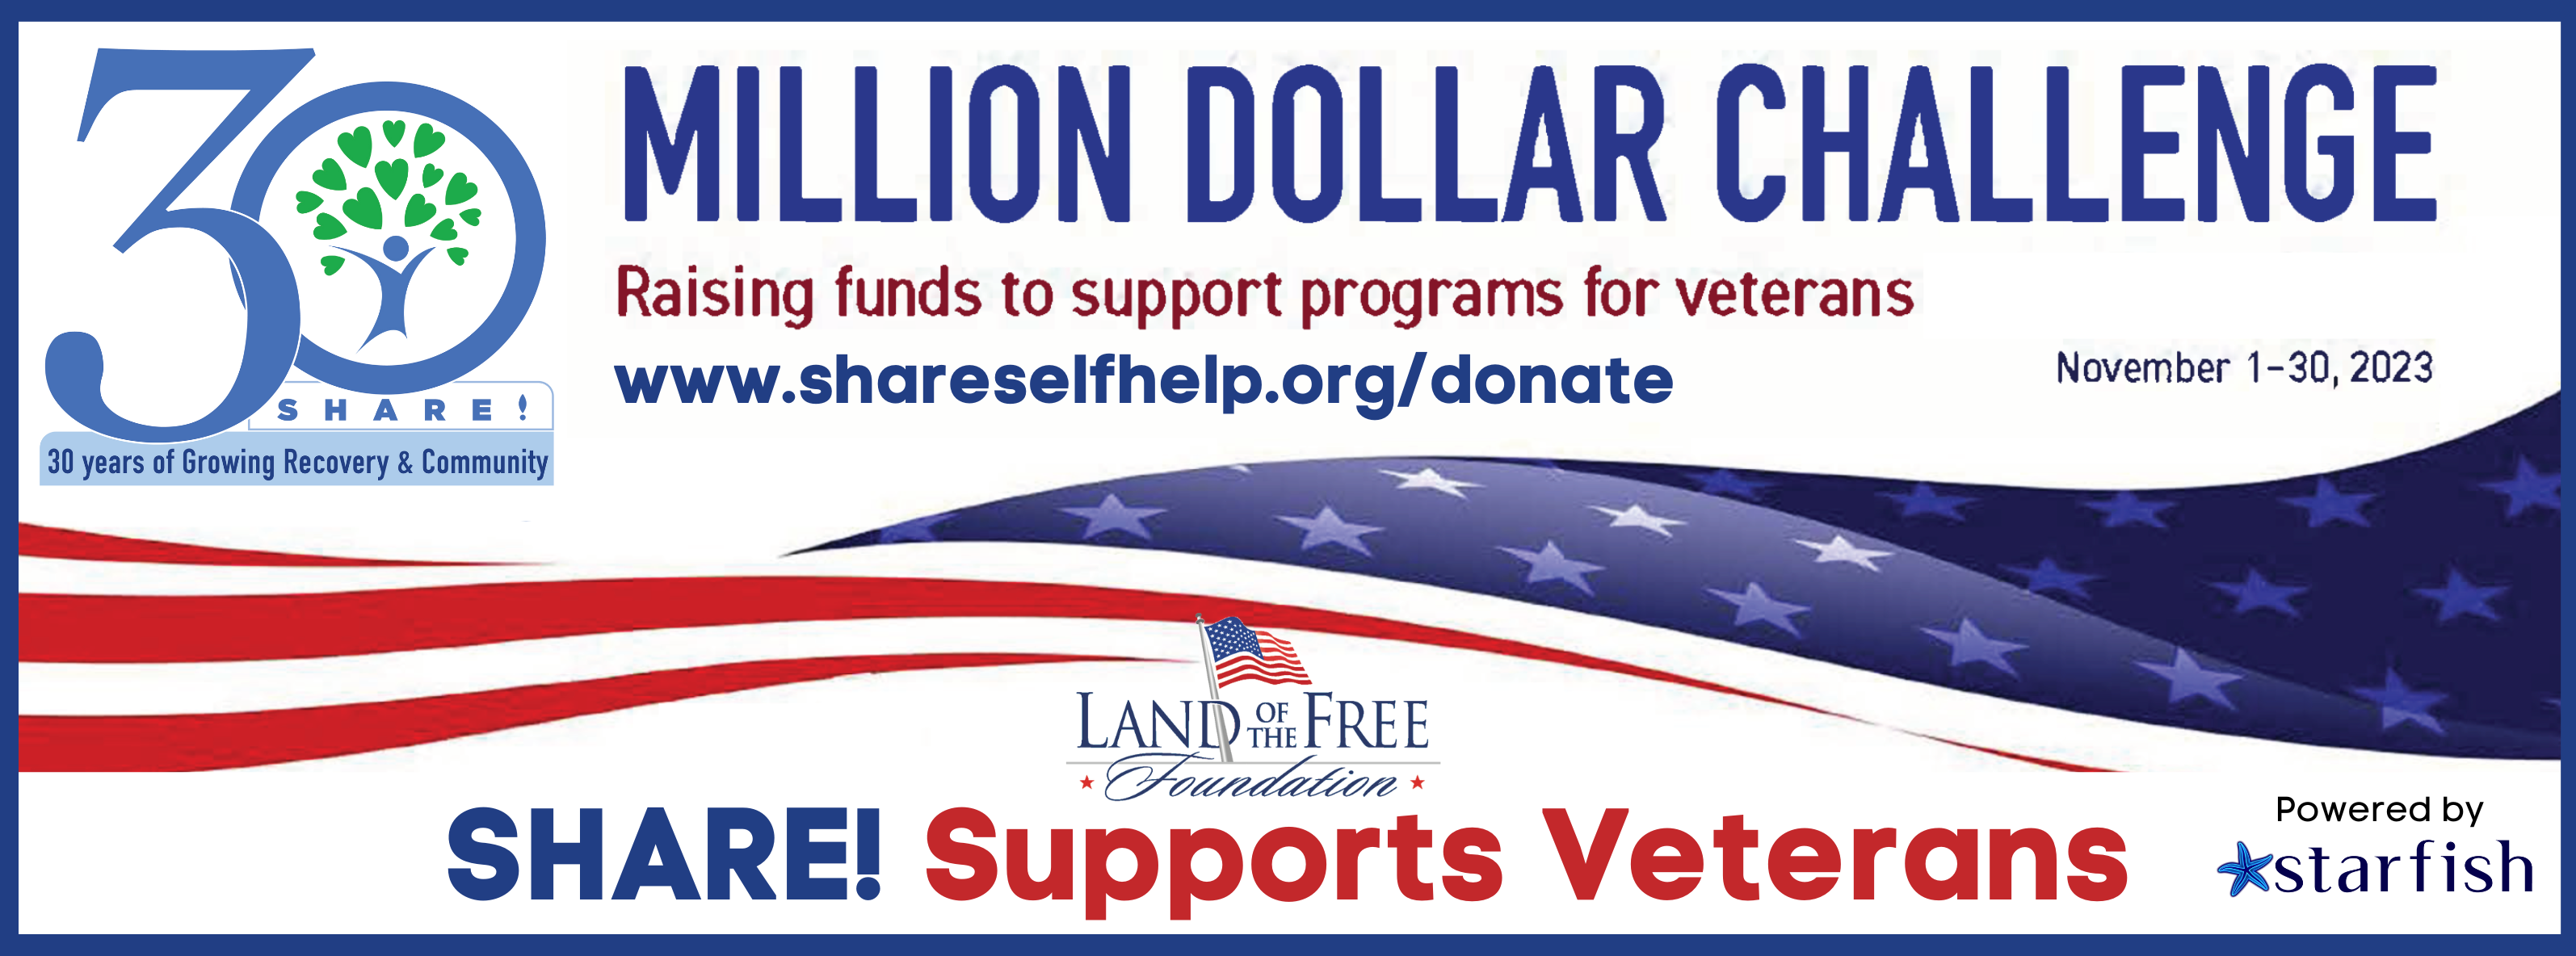 SHARE! partners with Land of the Free Foundation Million Dollar Challenge to raise funds to support Veterans!